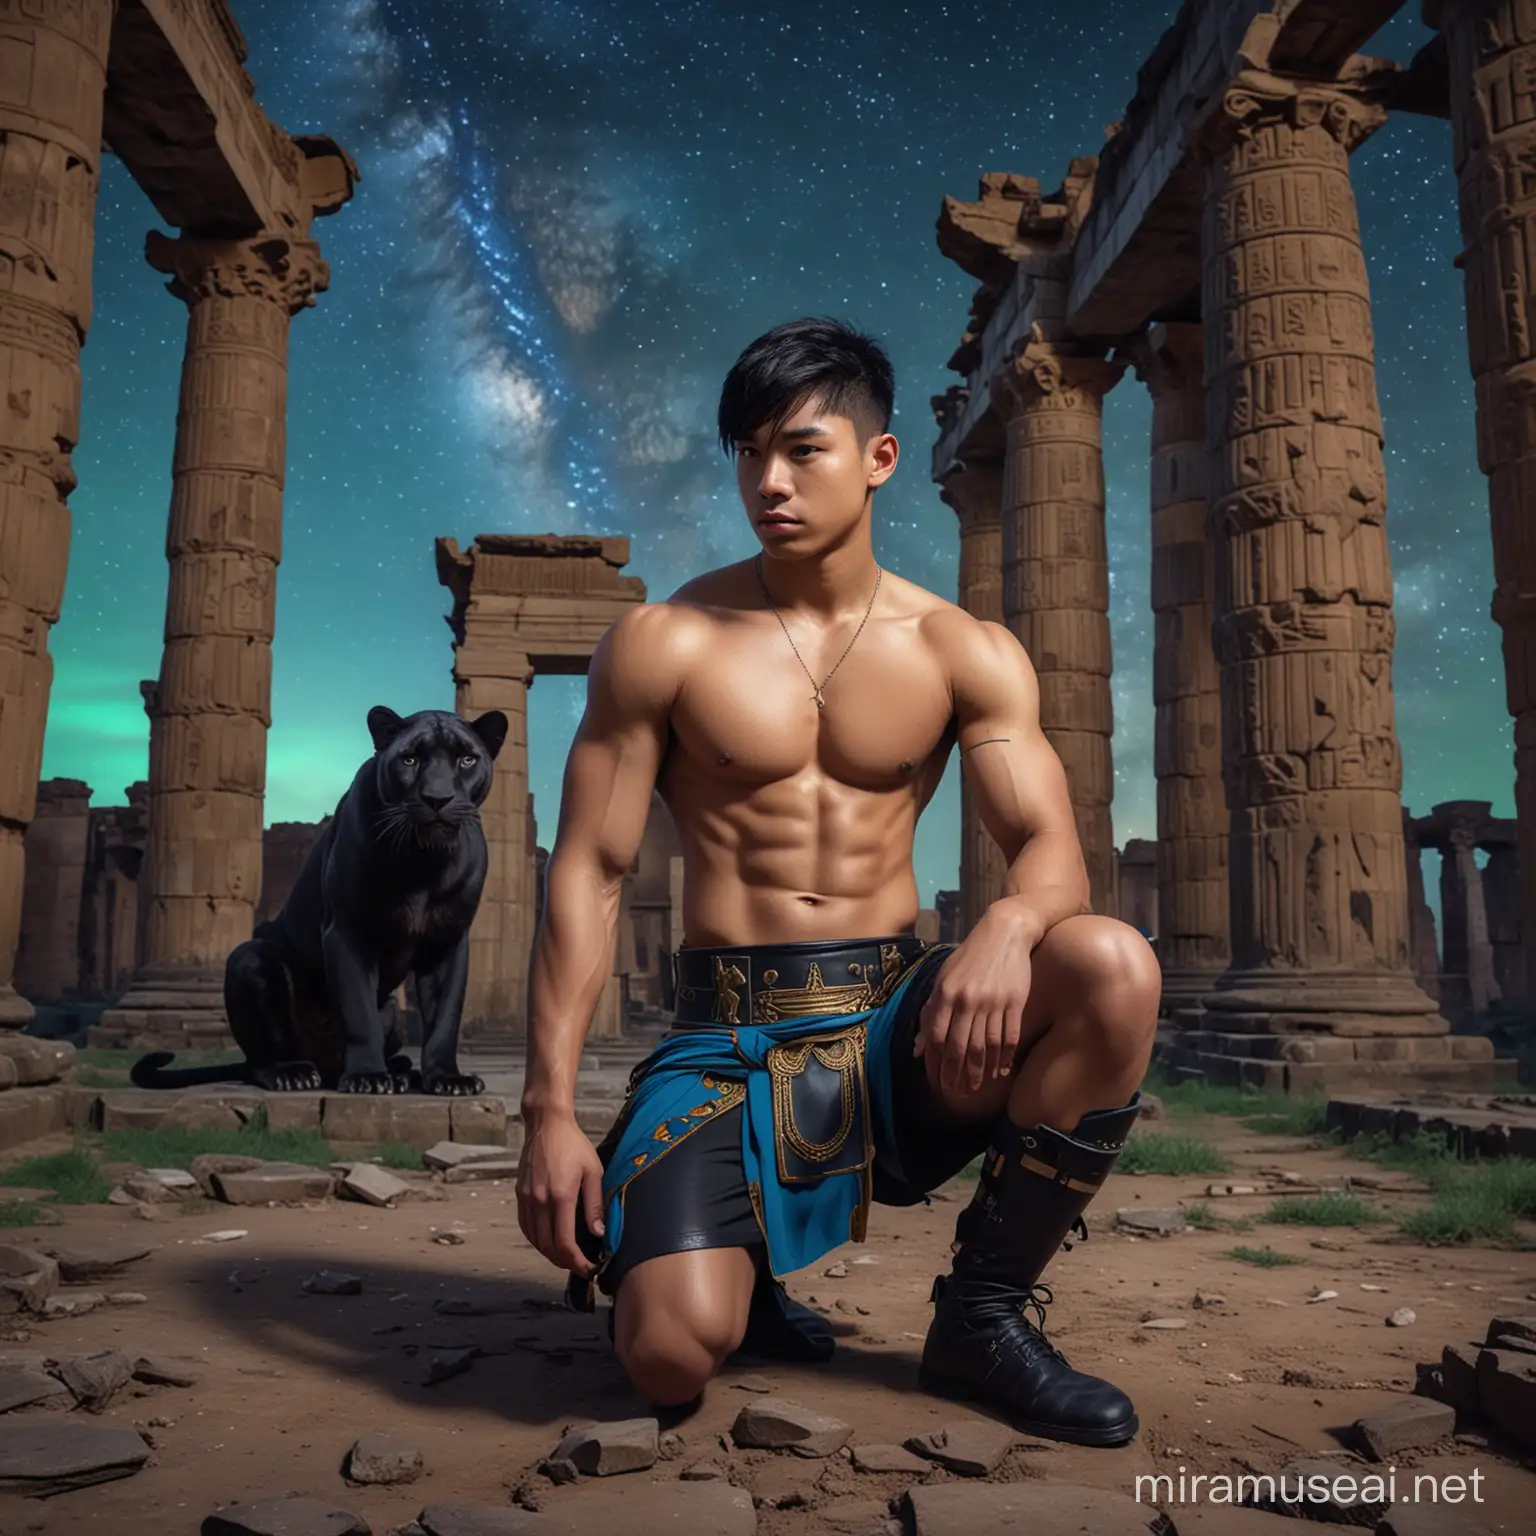 Asian Teen Boy in Roman Soldier Attire Crouching by Panthers in Neonlit Egyptian Temple Ruins at Night